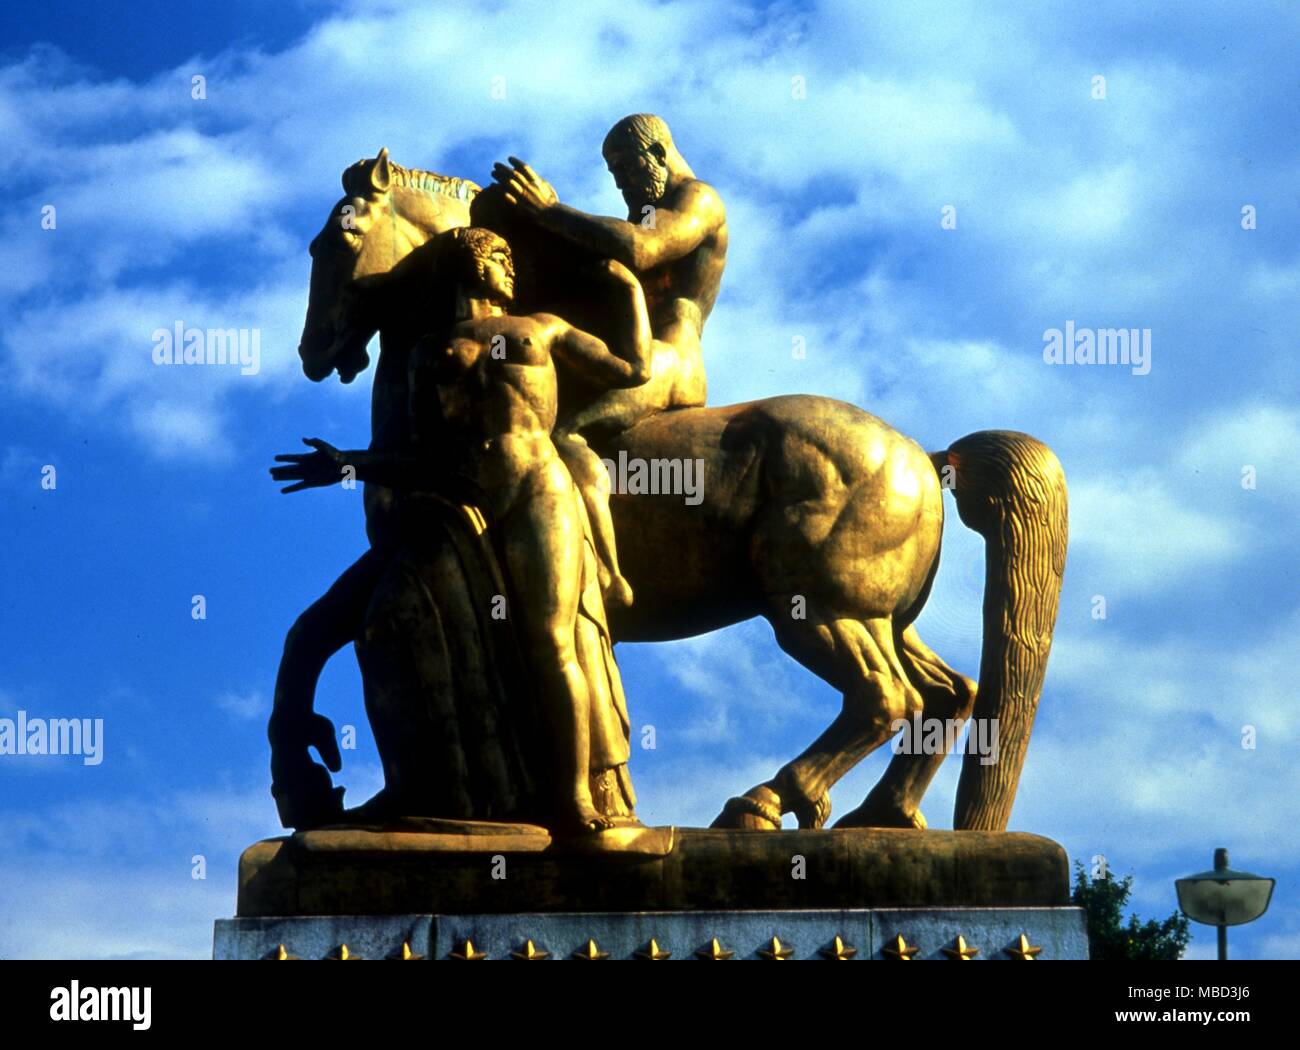 Symbol - Manpower. Sculpture 'The Arts of War' by J.E.Fraser. 1925 stands at the entrance to Rock Creek Parkway, Washington DC. USA. Mars is riding the horse and symbolizes the Nation's Manpower. Stock Photo